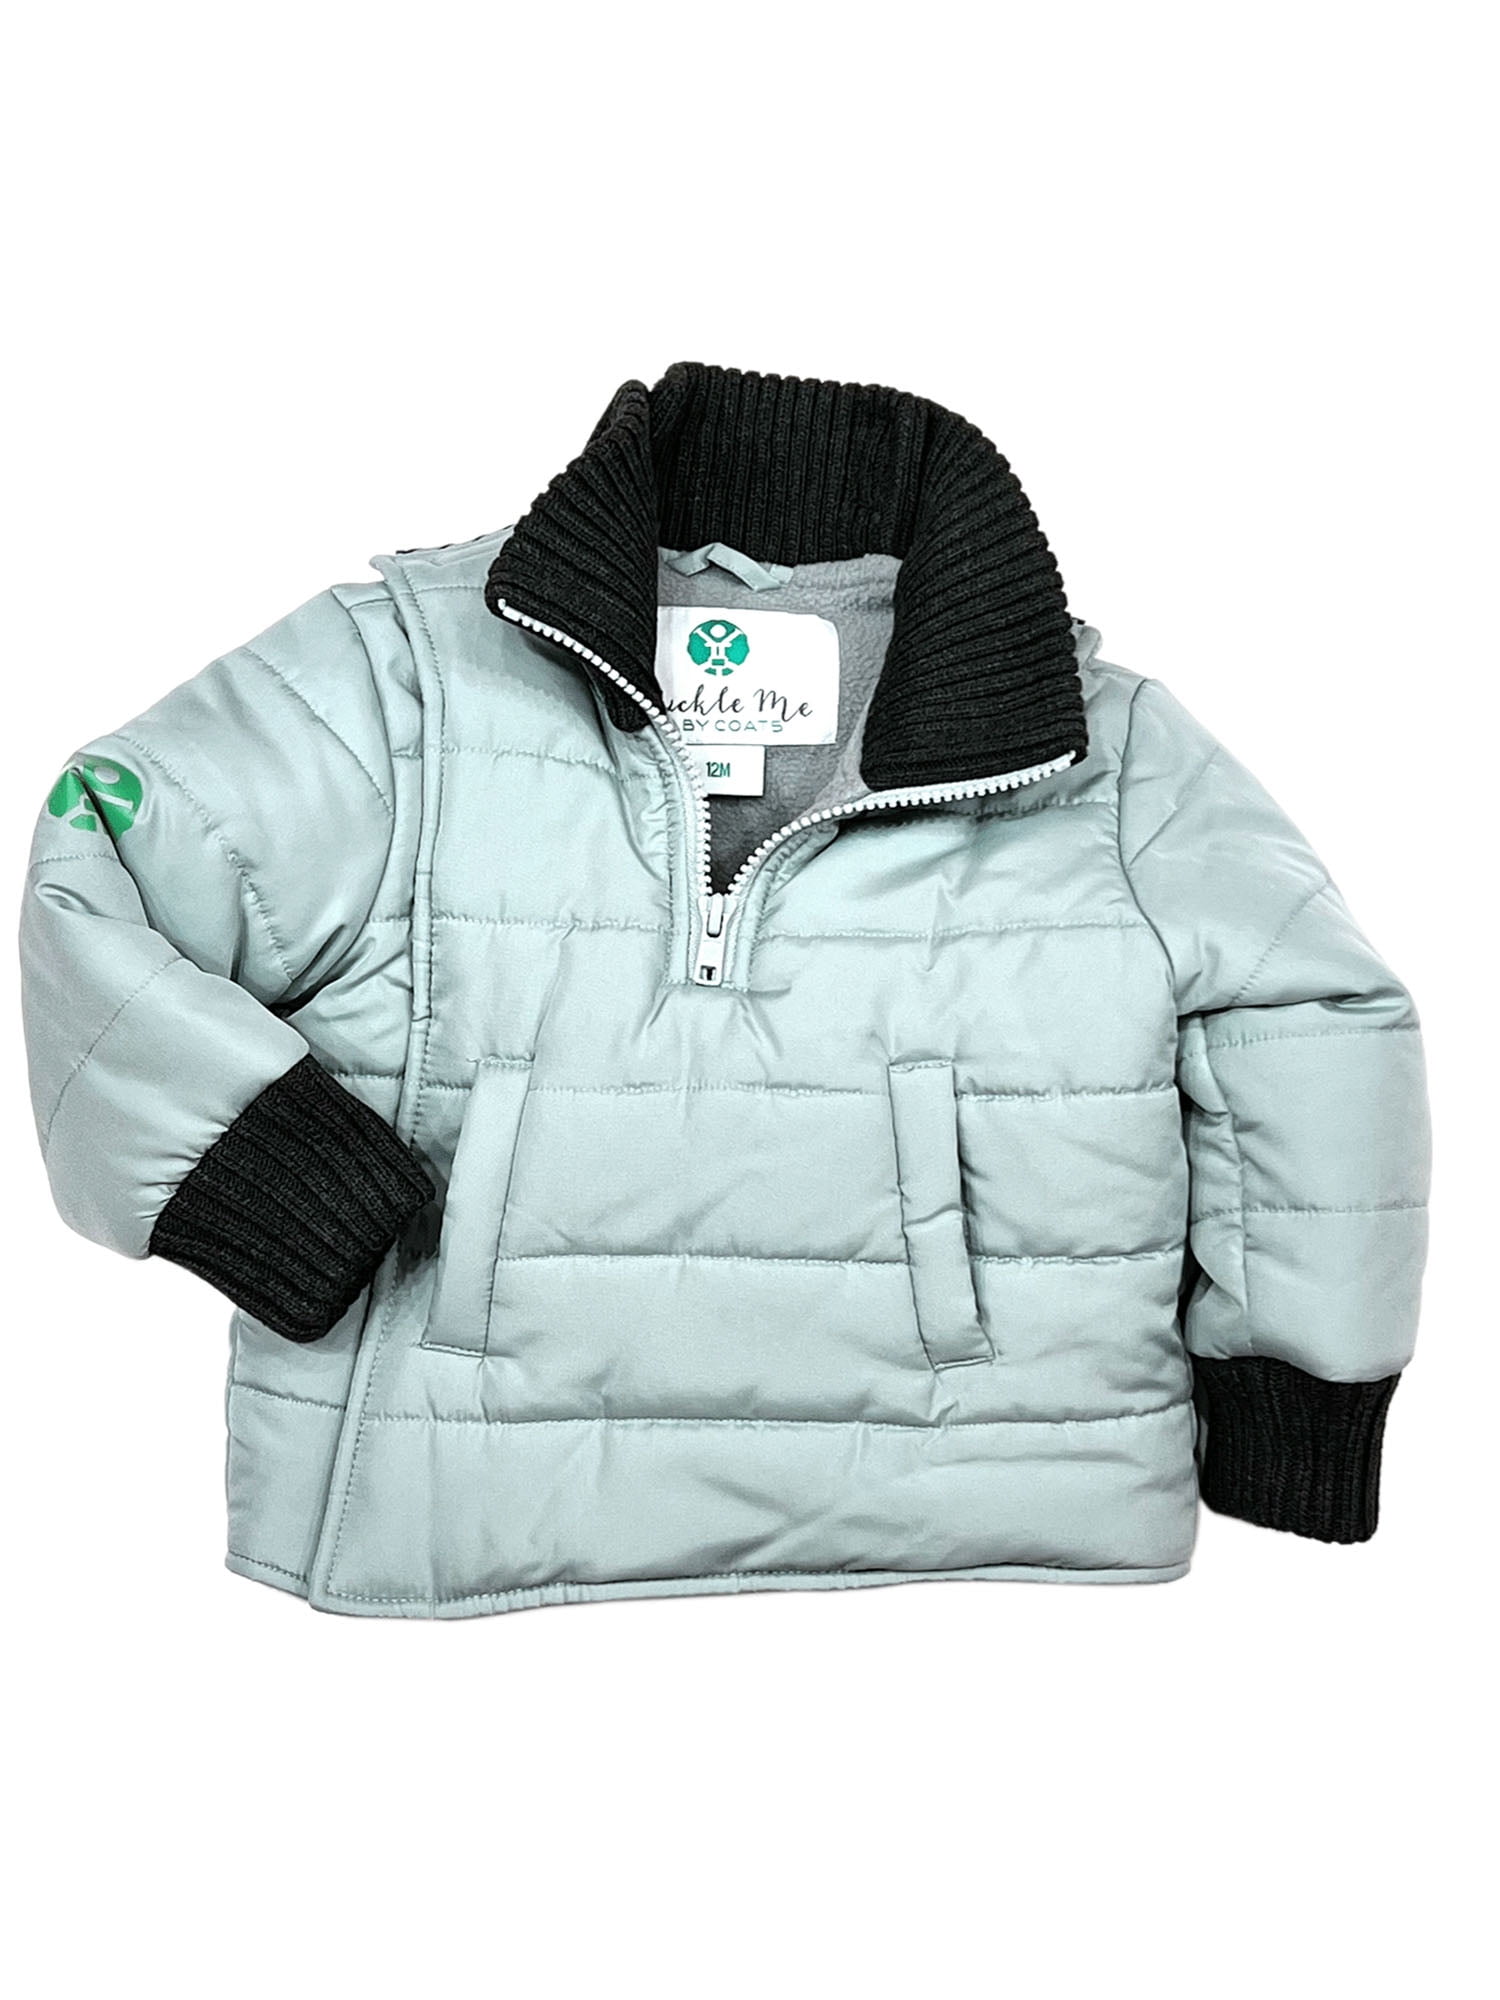 CAR SEAT APPROVED JACKETS - Kale and Krunches